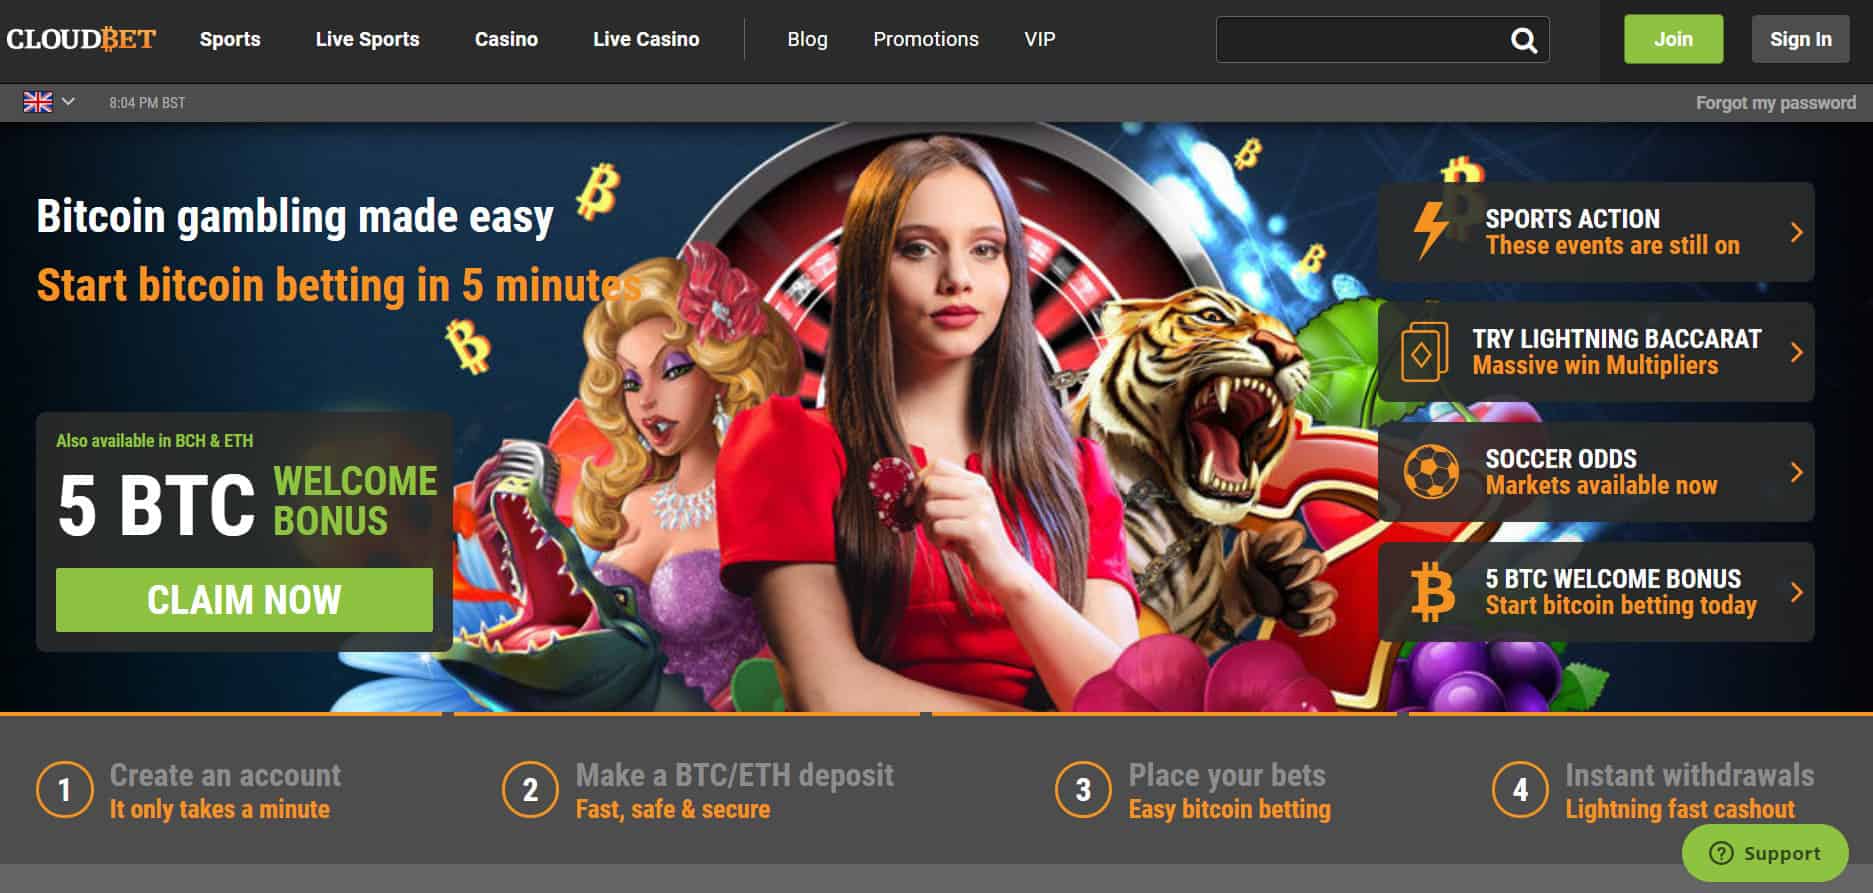 Need More Inspiration With bitcoin online casinos? Read this!